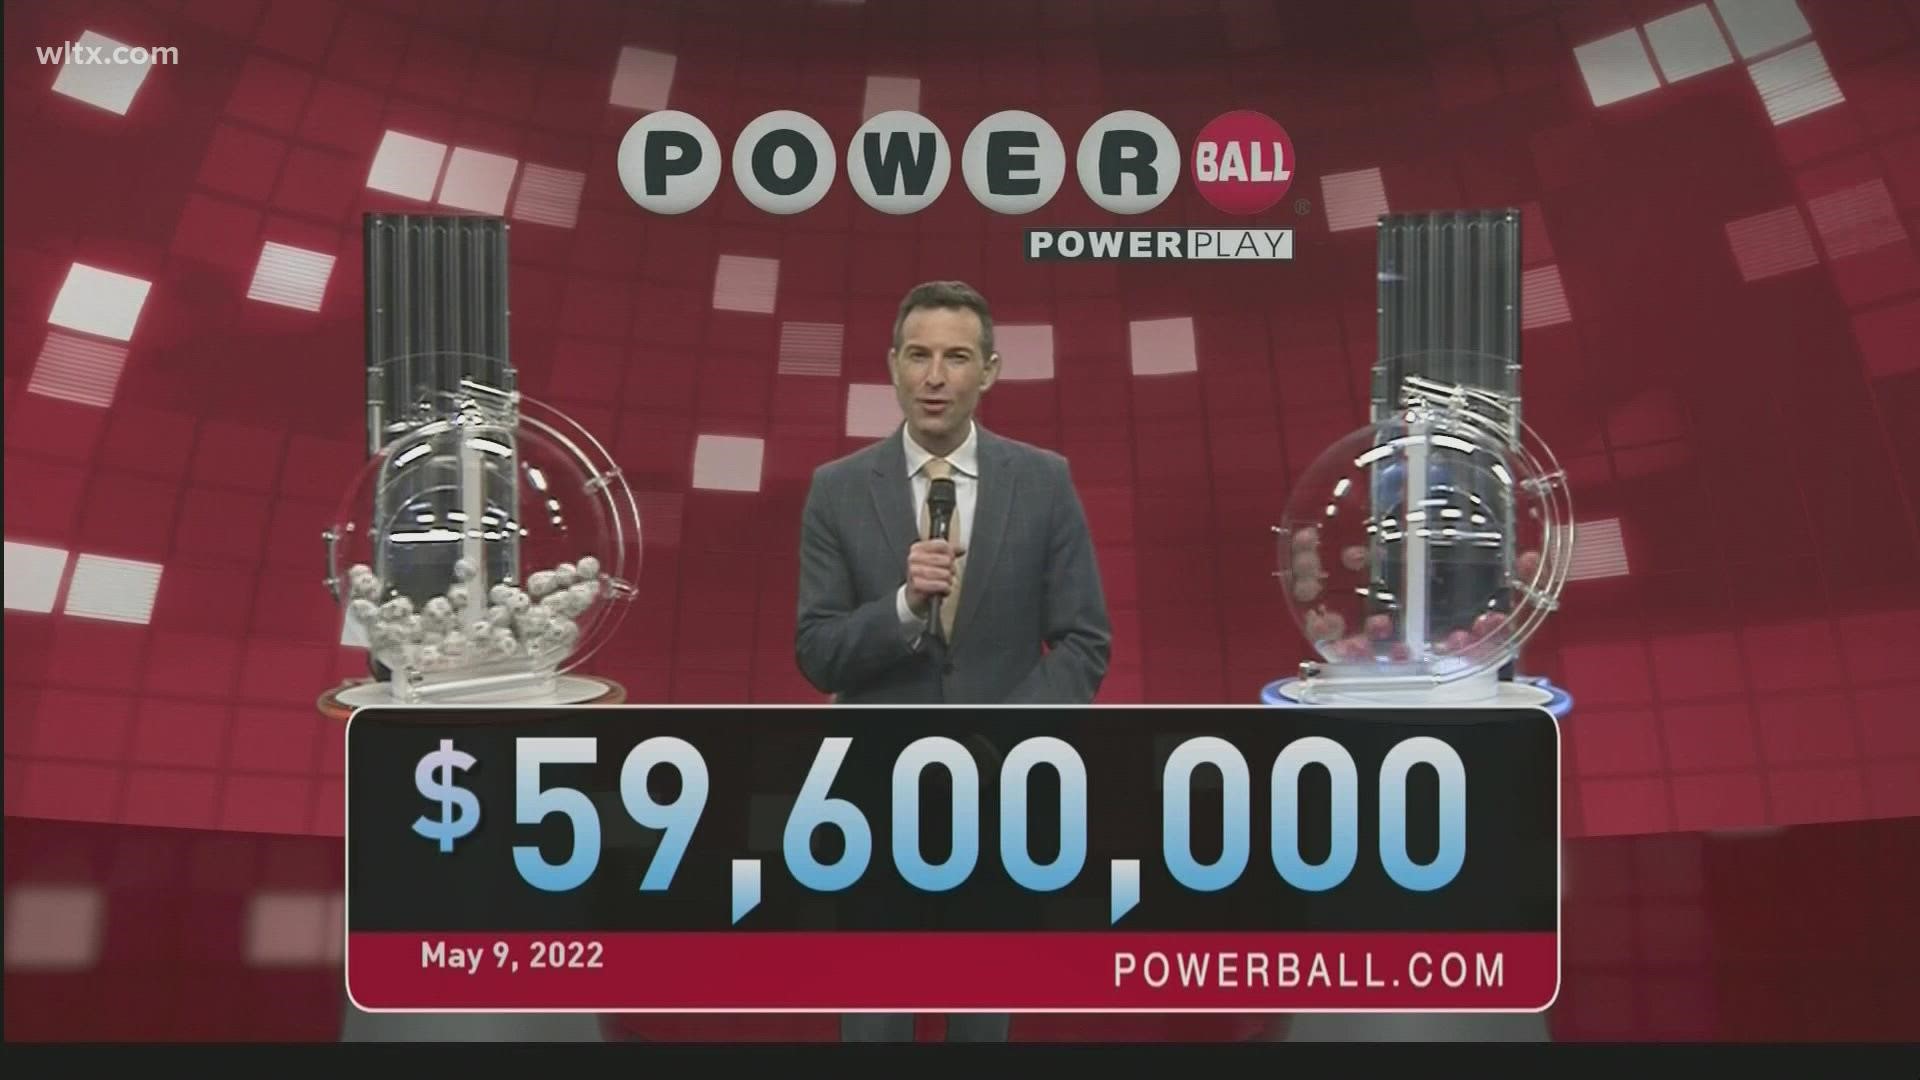 Here are the winning Powerball numbers for Monday, May 9, 2022.